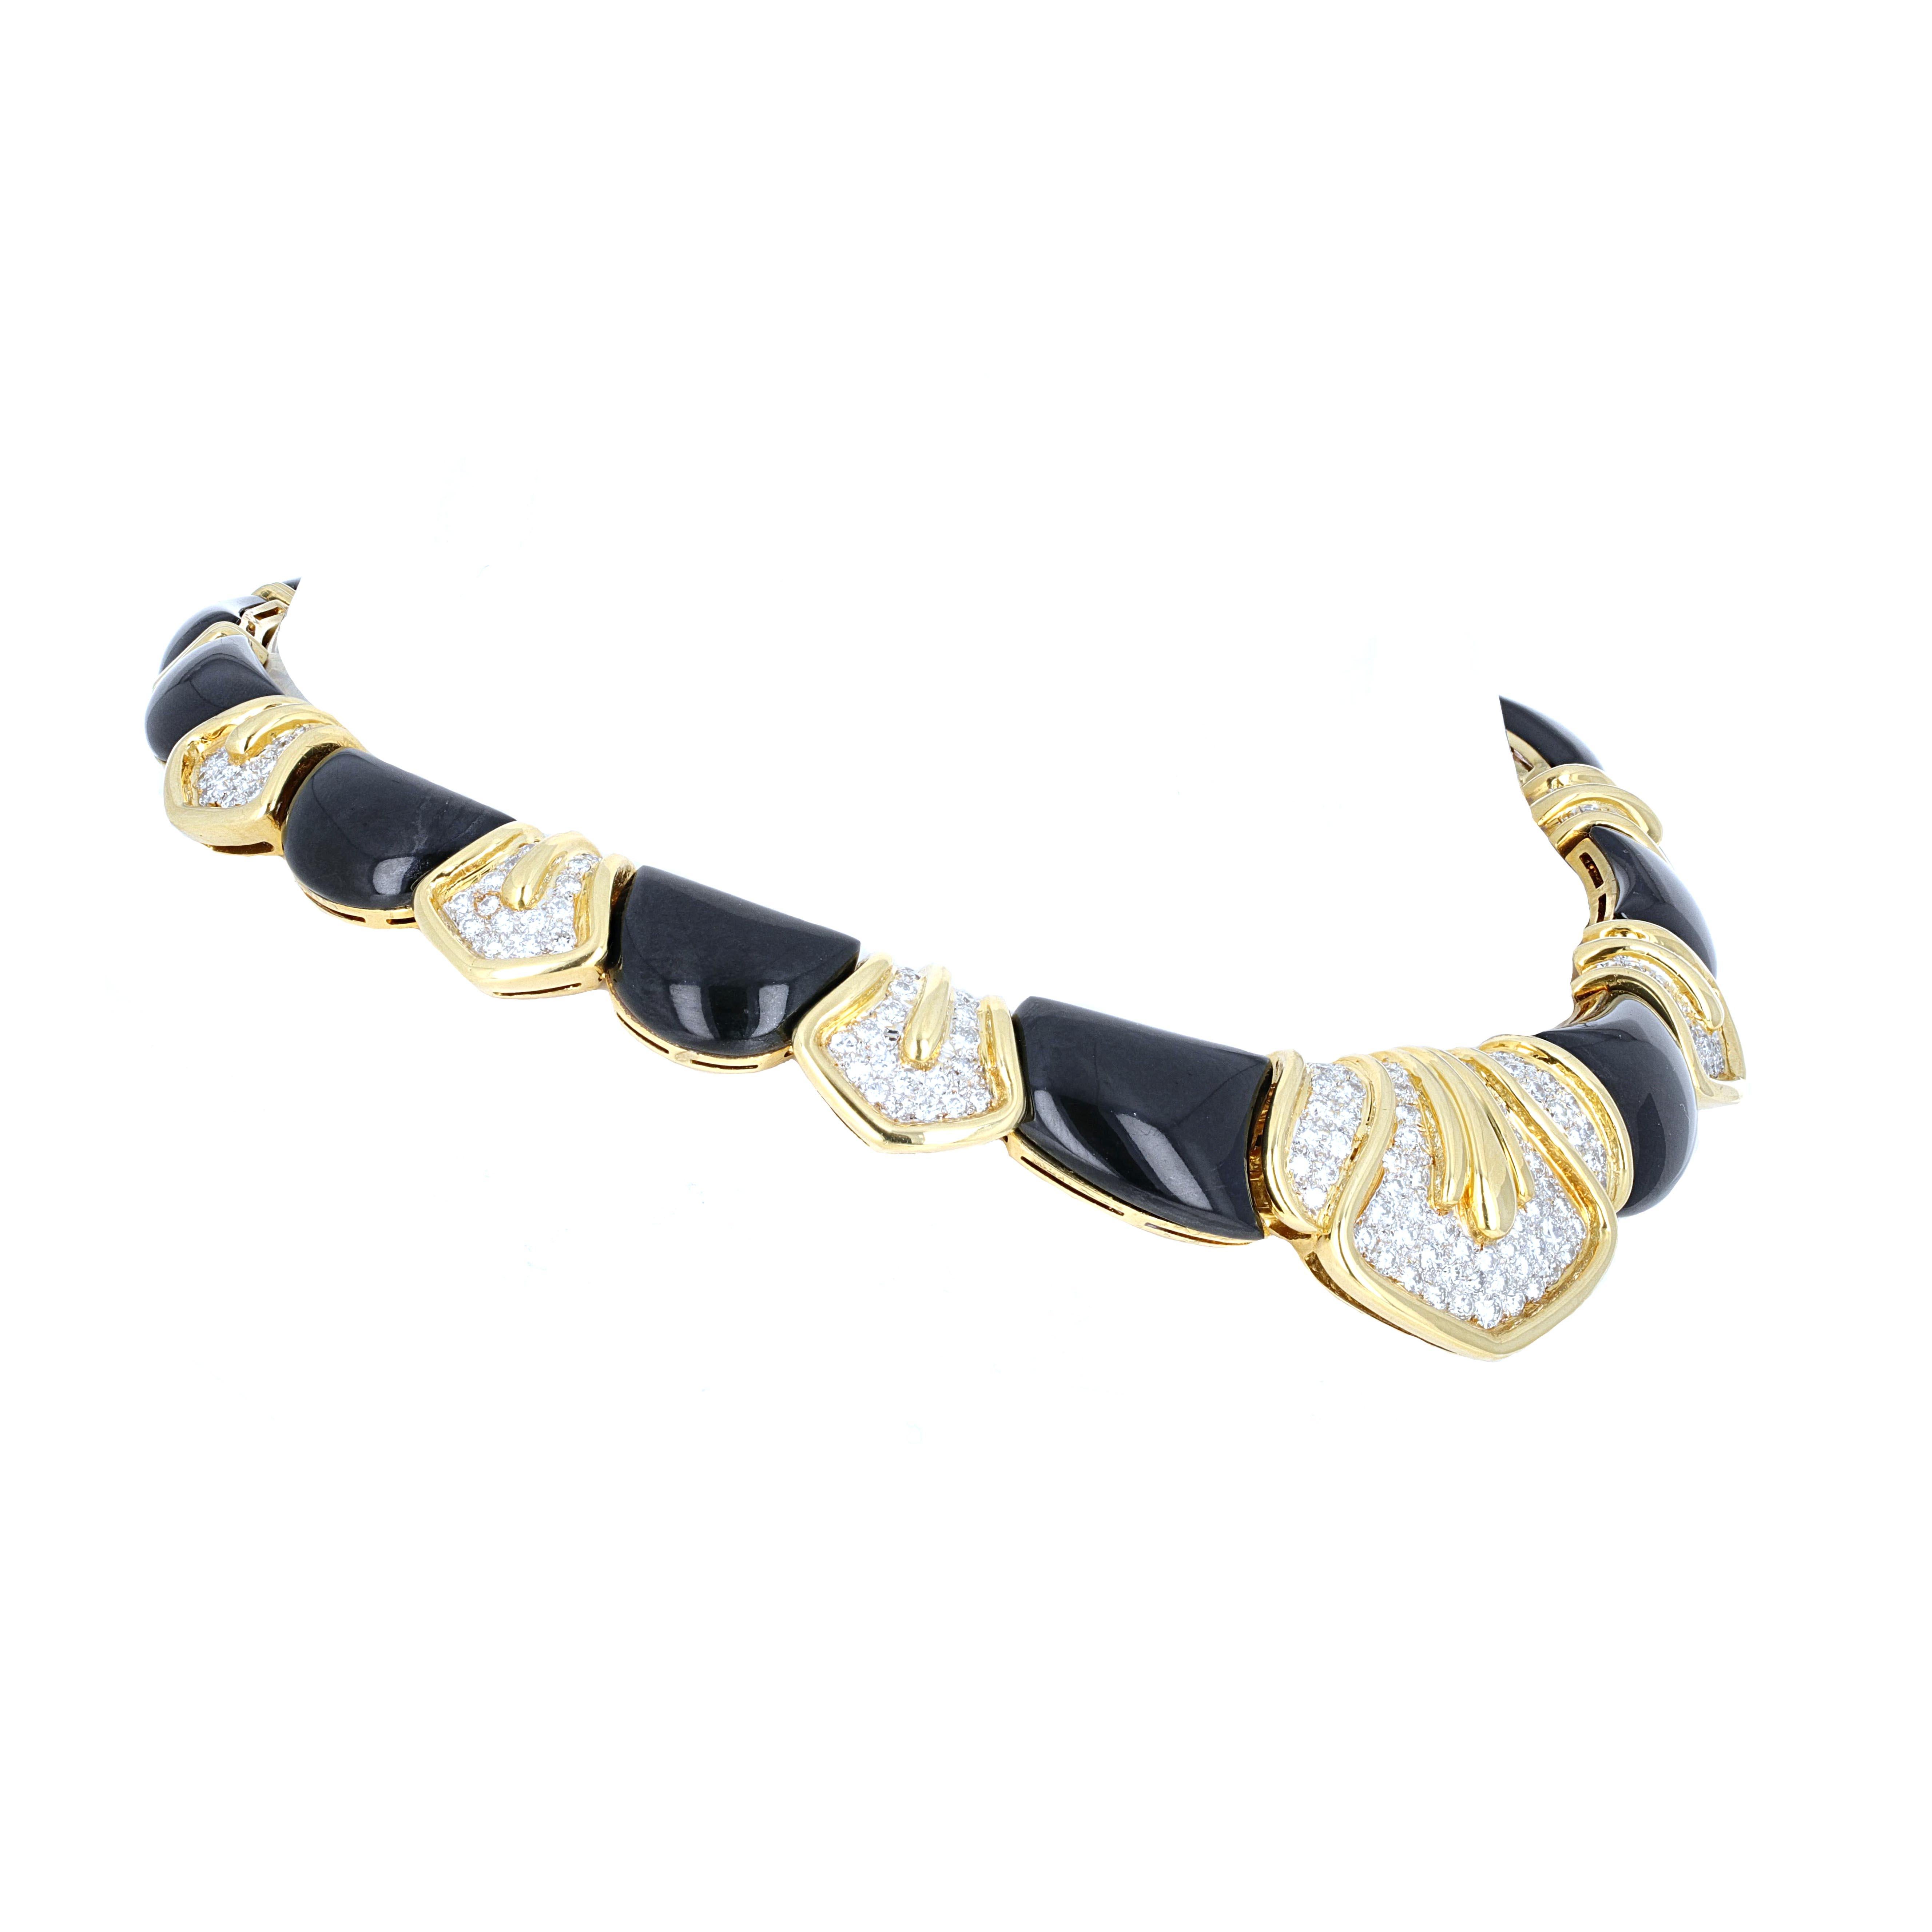 18 karat yellow gold diamond and onyx drop chocker necklace. The necklace has a retro style look. There is an estimated 4.50 carats total weight in diamond. 